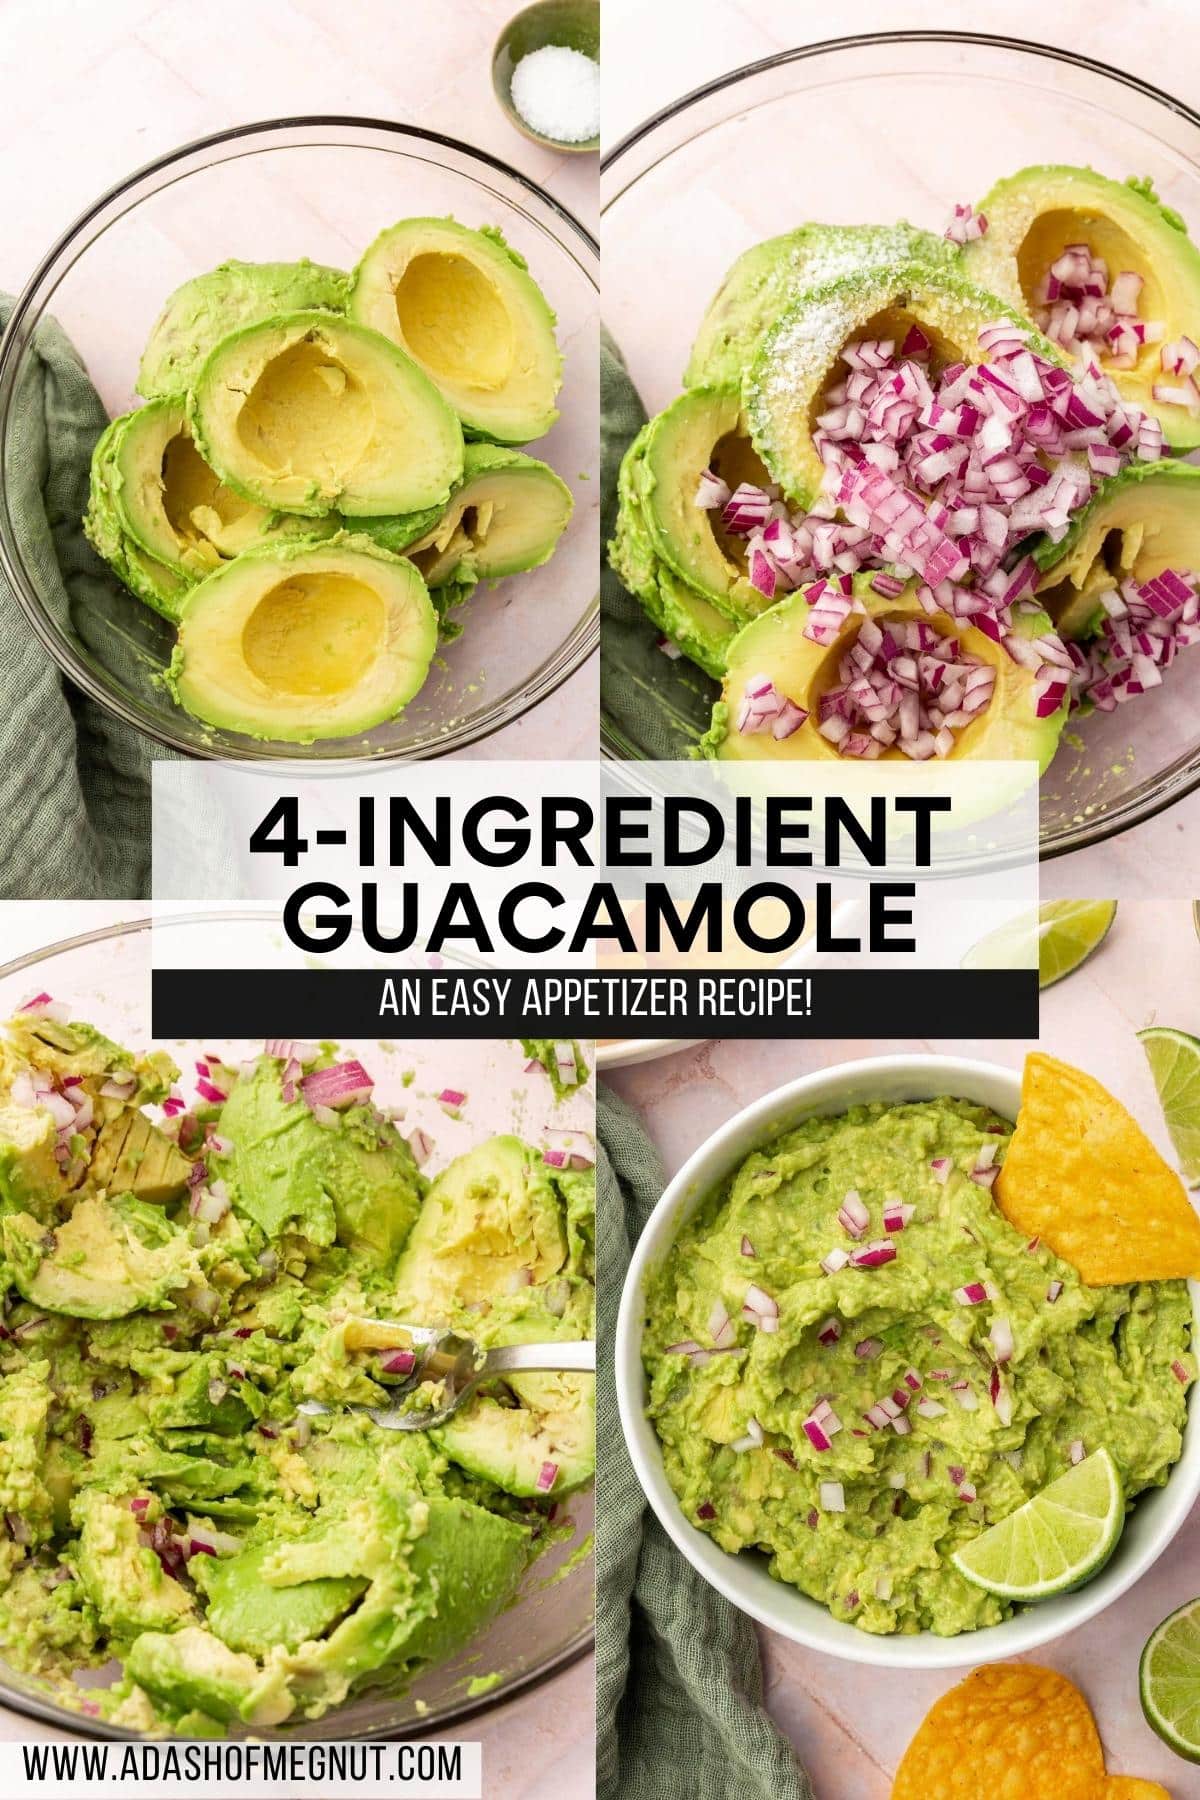 A four photo collage showing the process of making 4-ingredient guacamole. Photo 1: A glass mixing bowl with six avocado halves in it. Photo 2: A glass mixing bowl with avocado halves topped with kosher salt and diced red onion. Photo 3: A fork masking avocados and diced red onion in a large mixing bowl. Photo 4: A bowl of guacamole topped with diced red onion, a single tortilla chip and a lime wedge for serving.